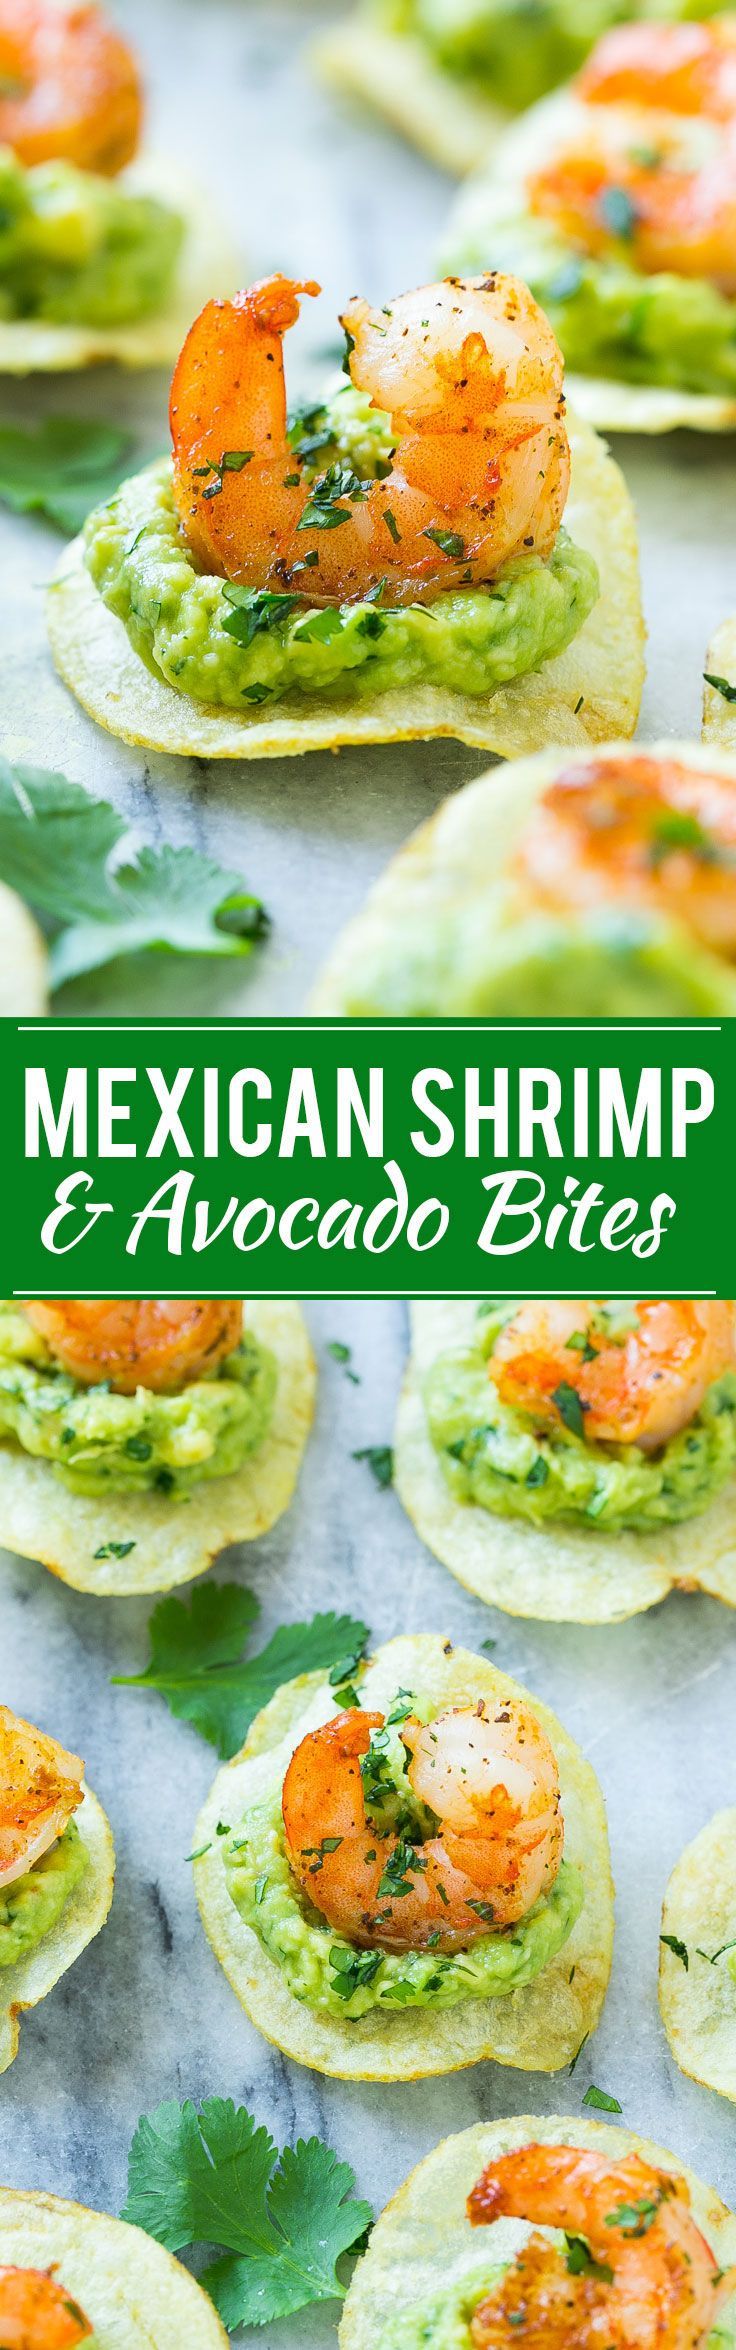 This recipe for Mexican shrimp bites is seared shrimp and guacamole layered onto individual potato chips. A super easy appetizer